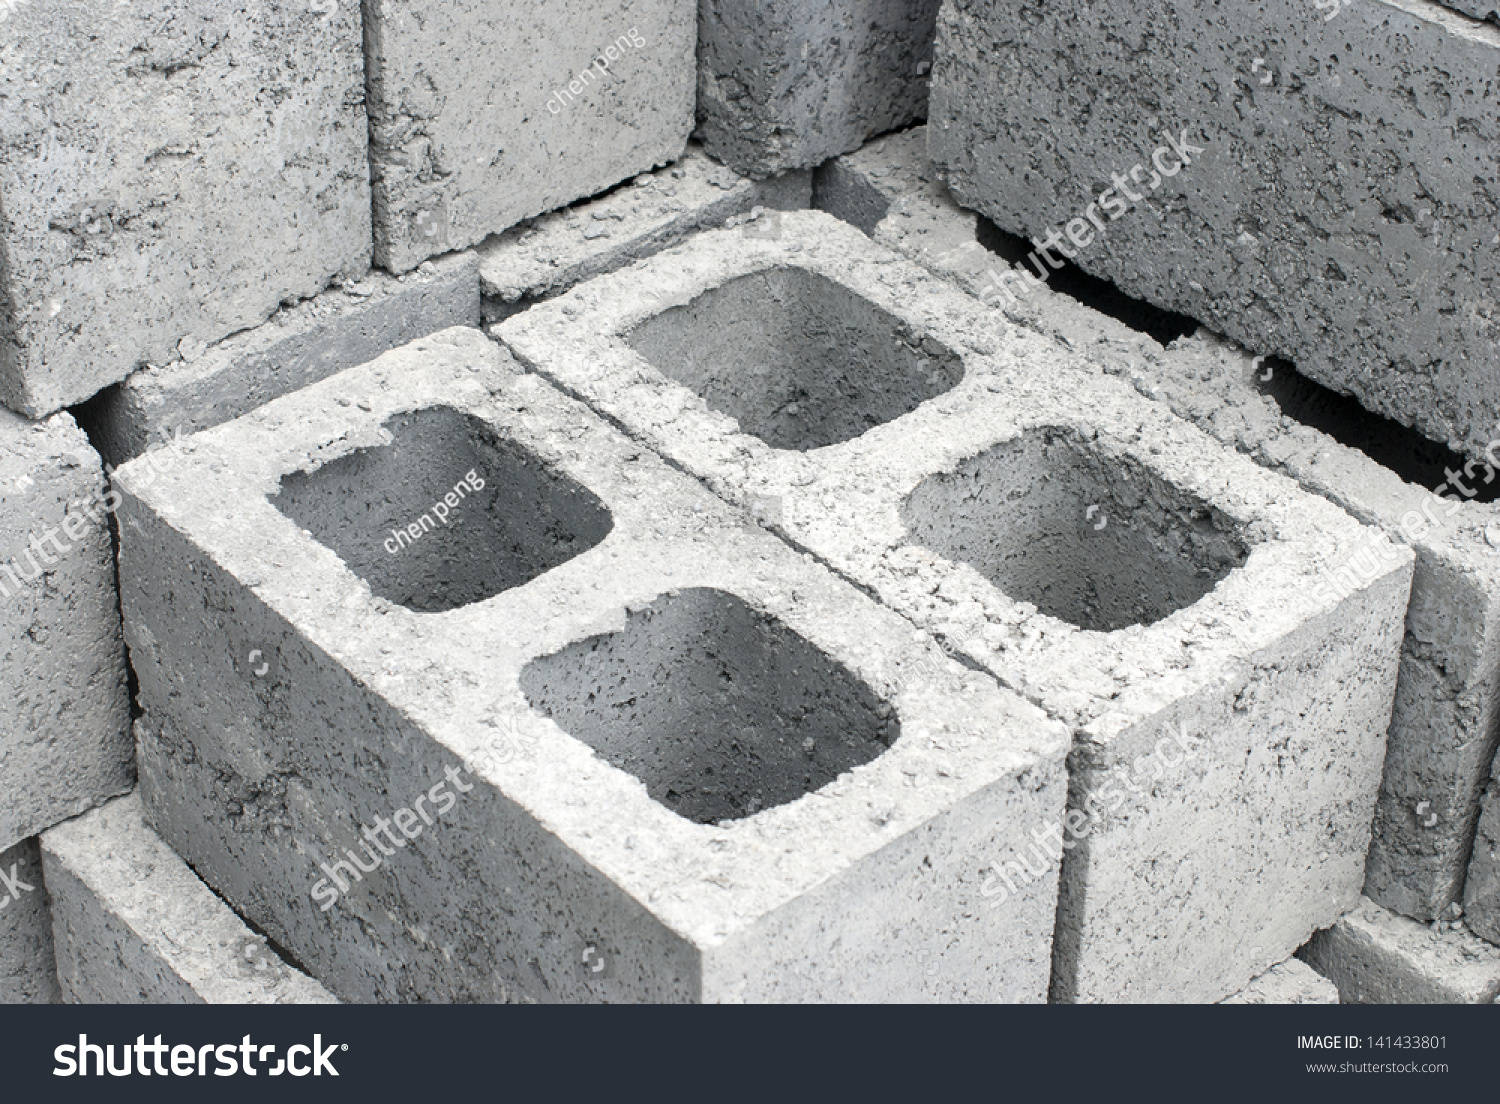 Cement Blocks Used In Building Construction Stock Photo 141433801